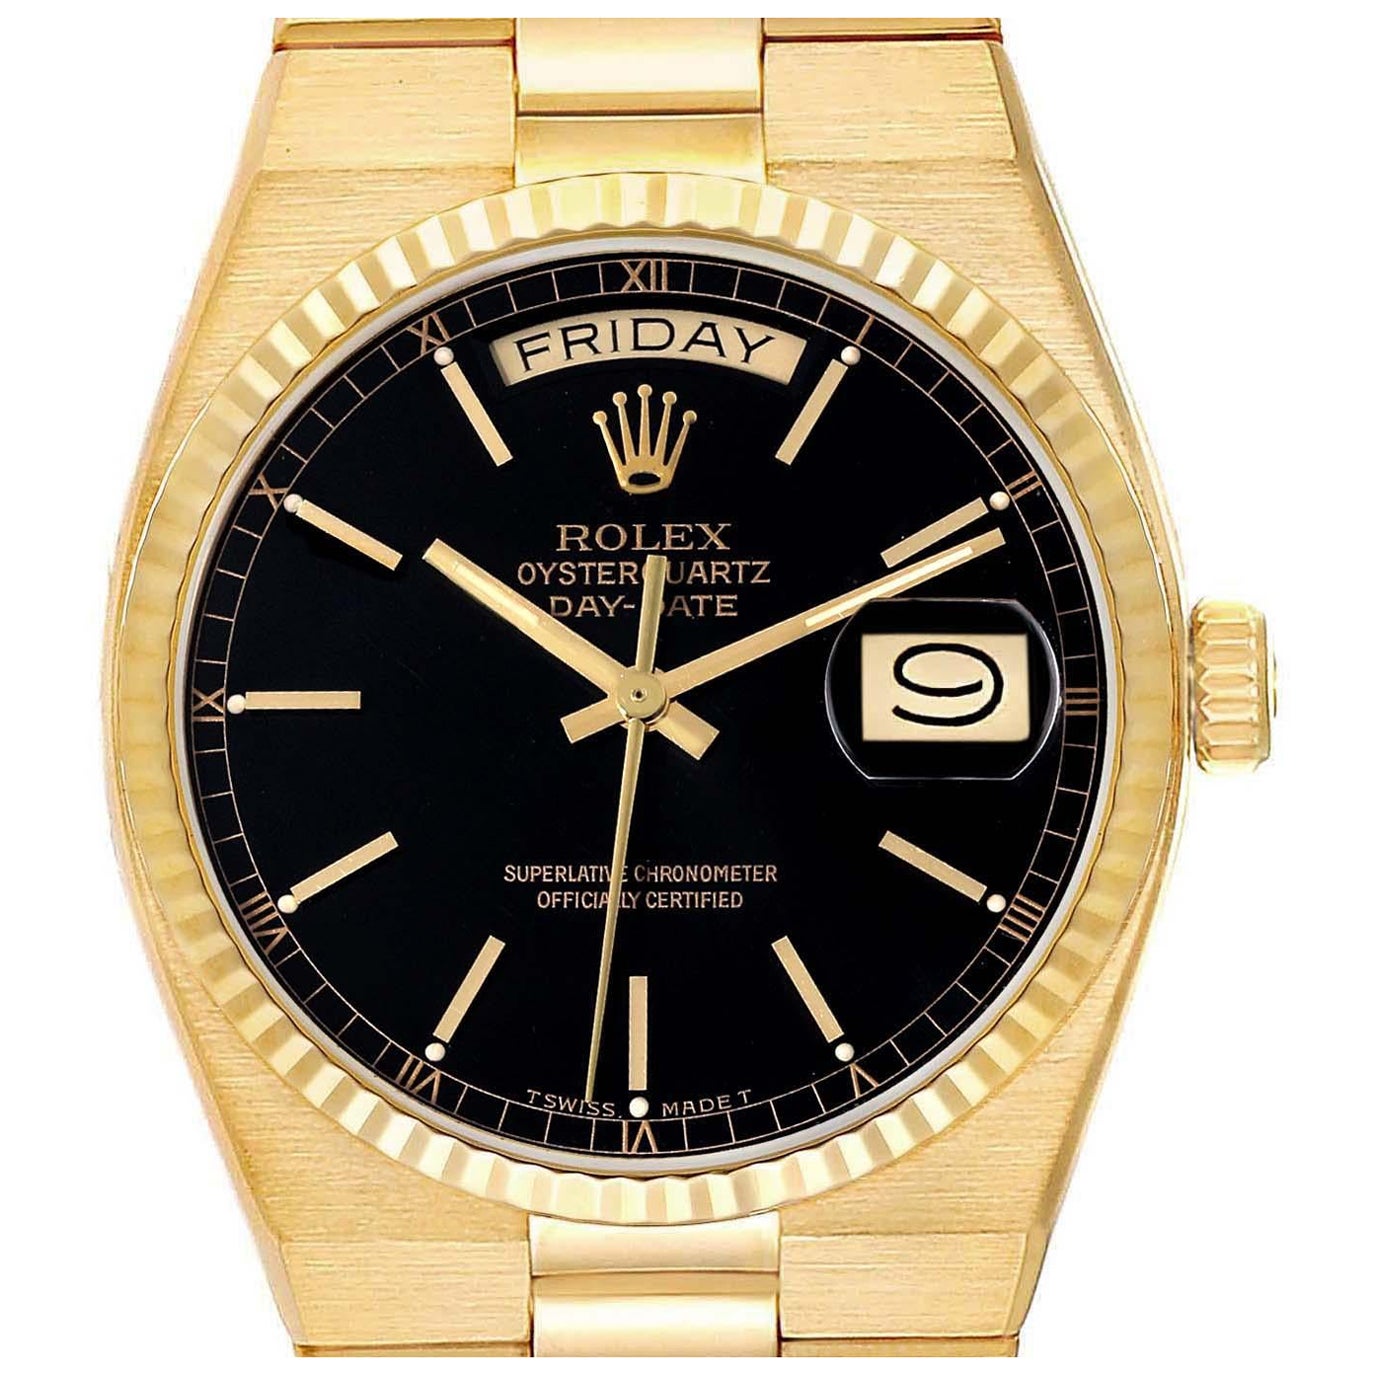 Rolex Oysterquartz President Day-Date Black Dial Yellow Gold Mens Watch 19018 For Sale